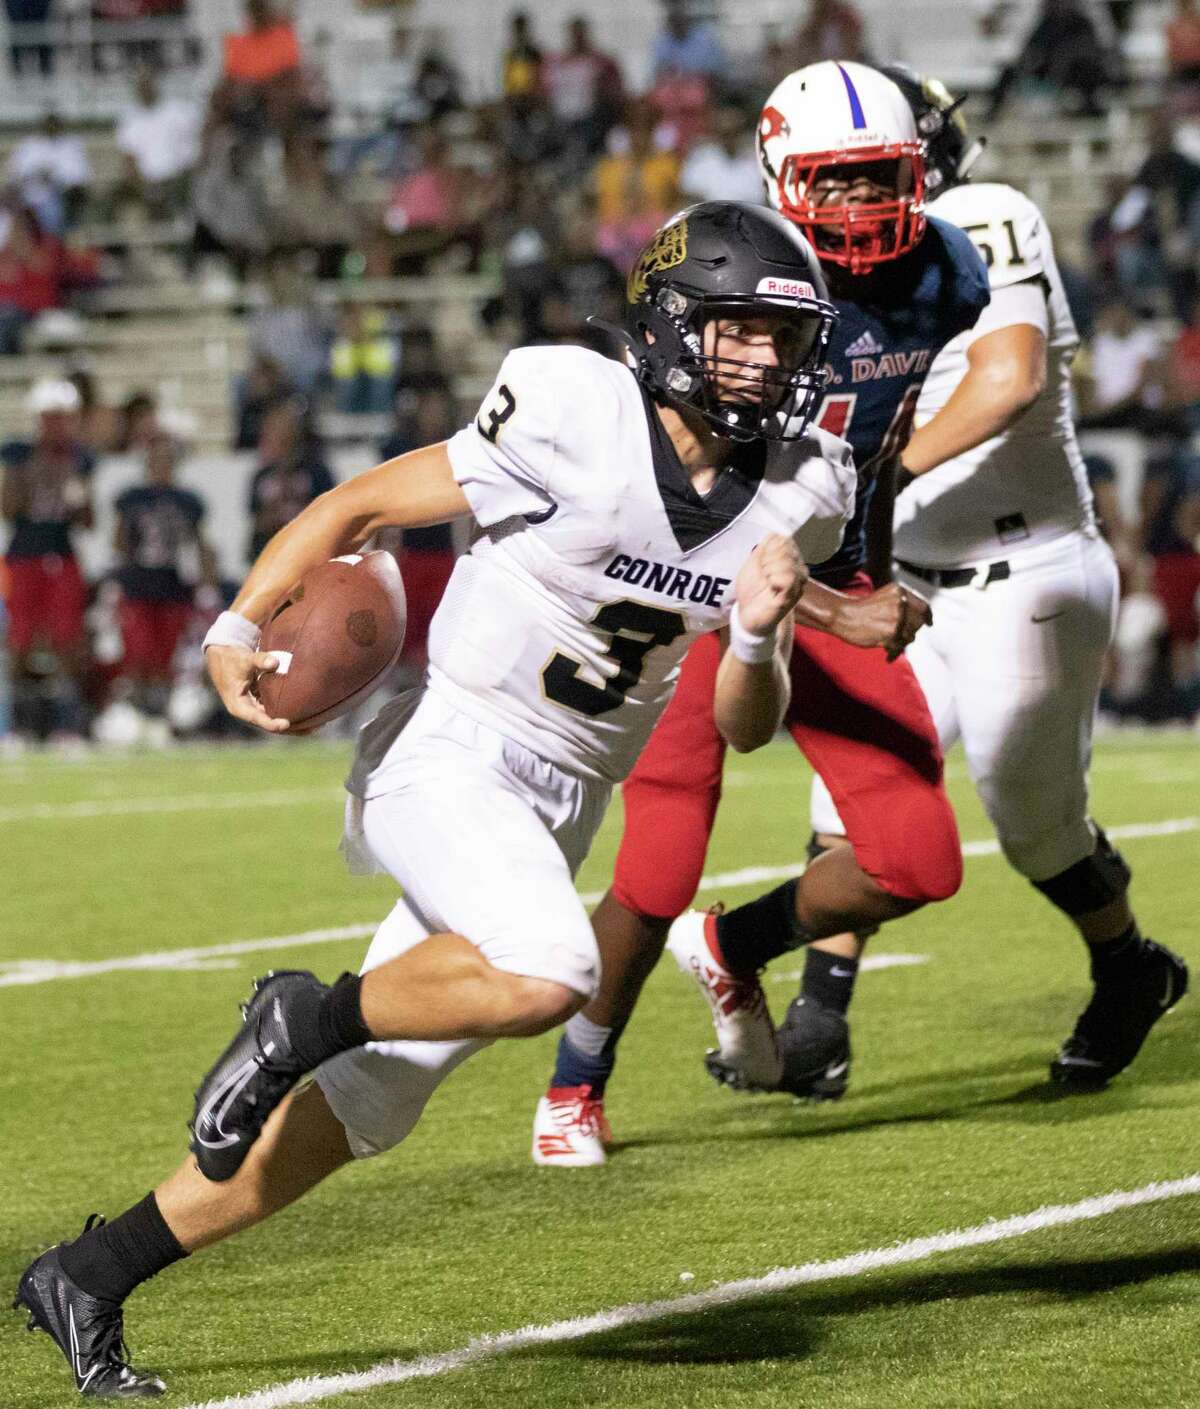 Conroe quarterback Christian Pack is currently the District 15-6A passing leader, but he also ranked fifth in rushing yards.